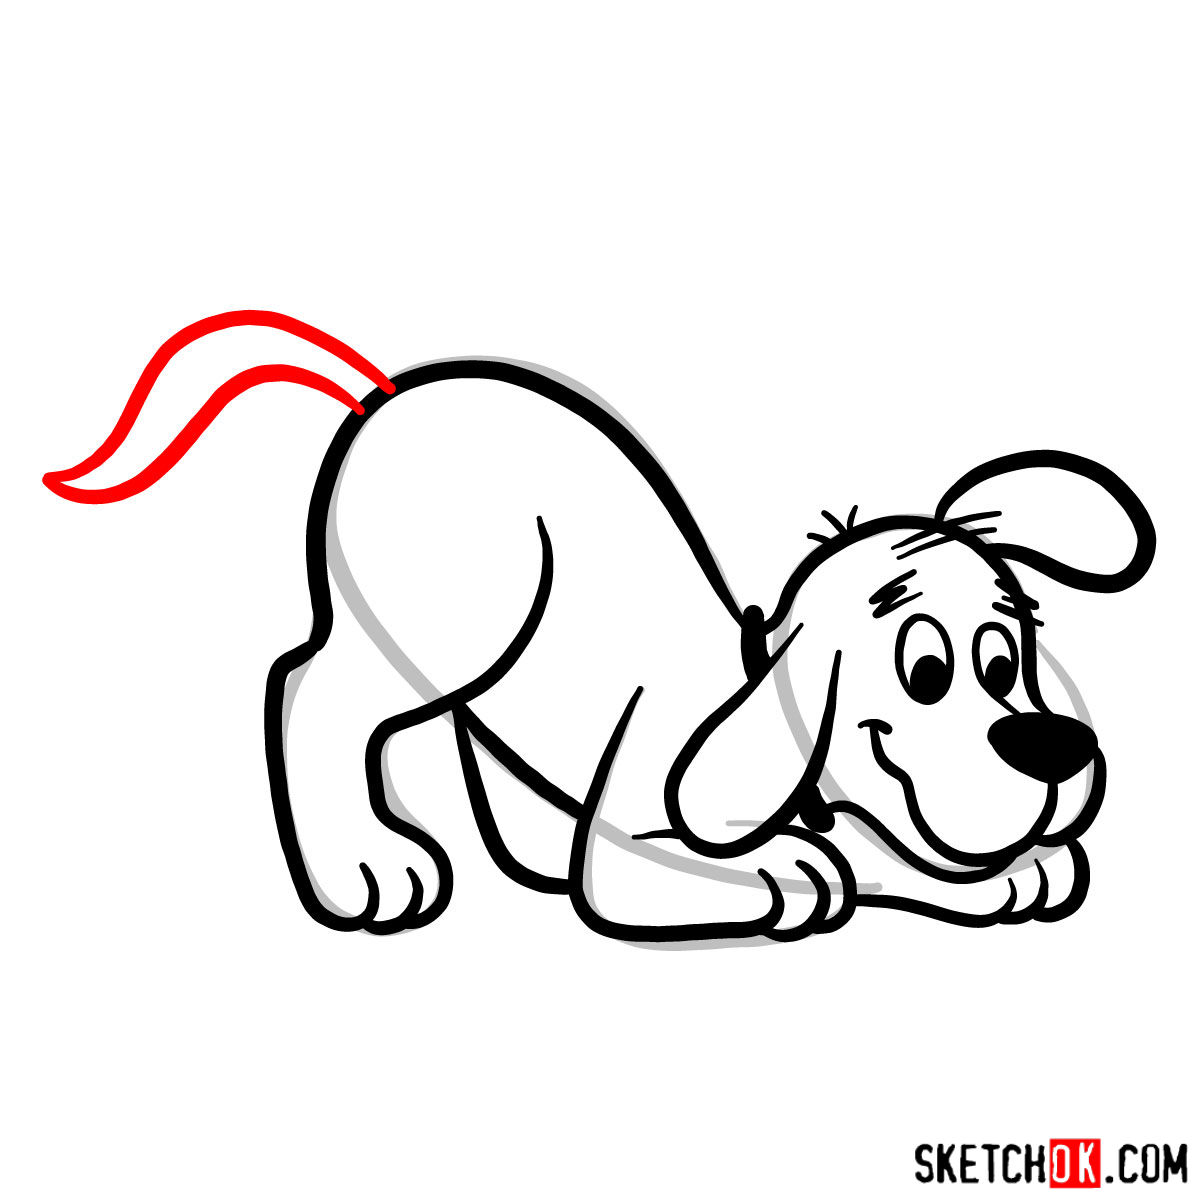 How to draw Clifford the Big Red Dog - step 08